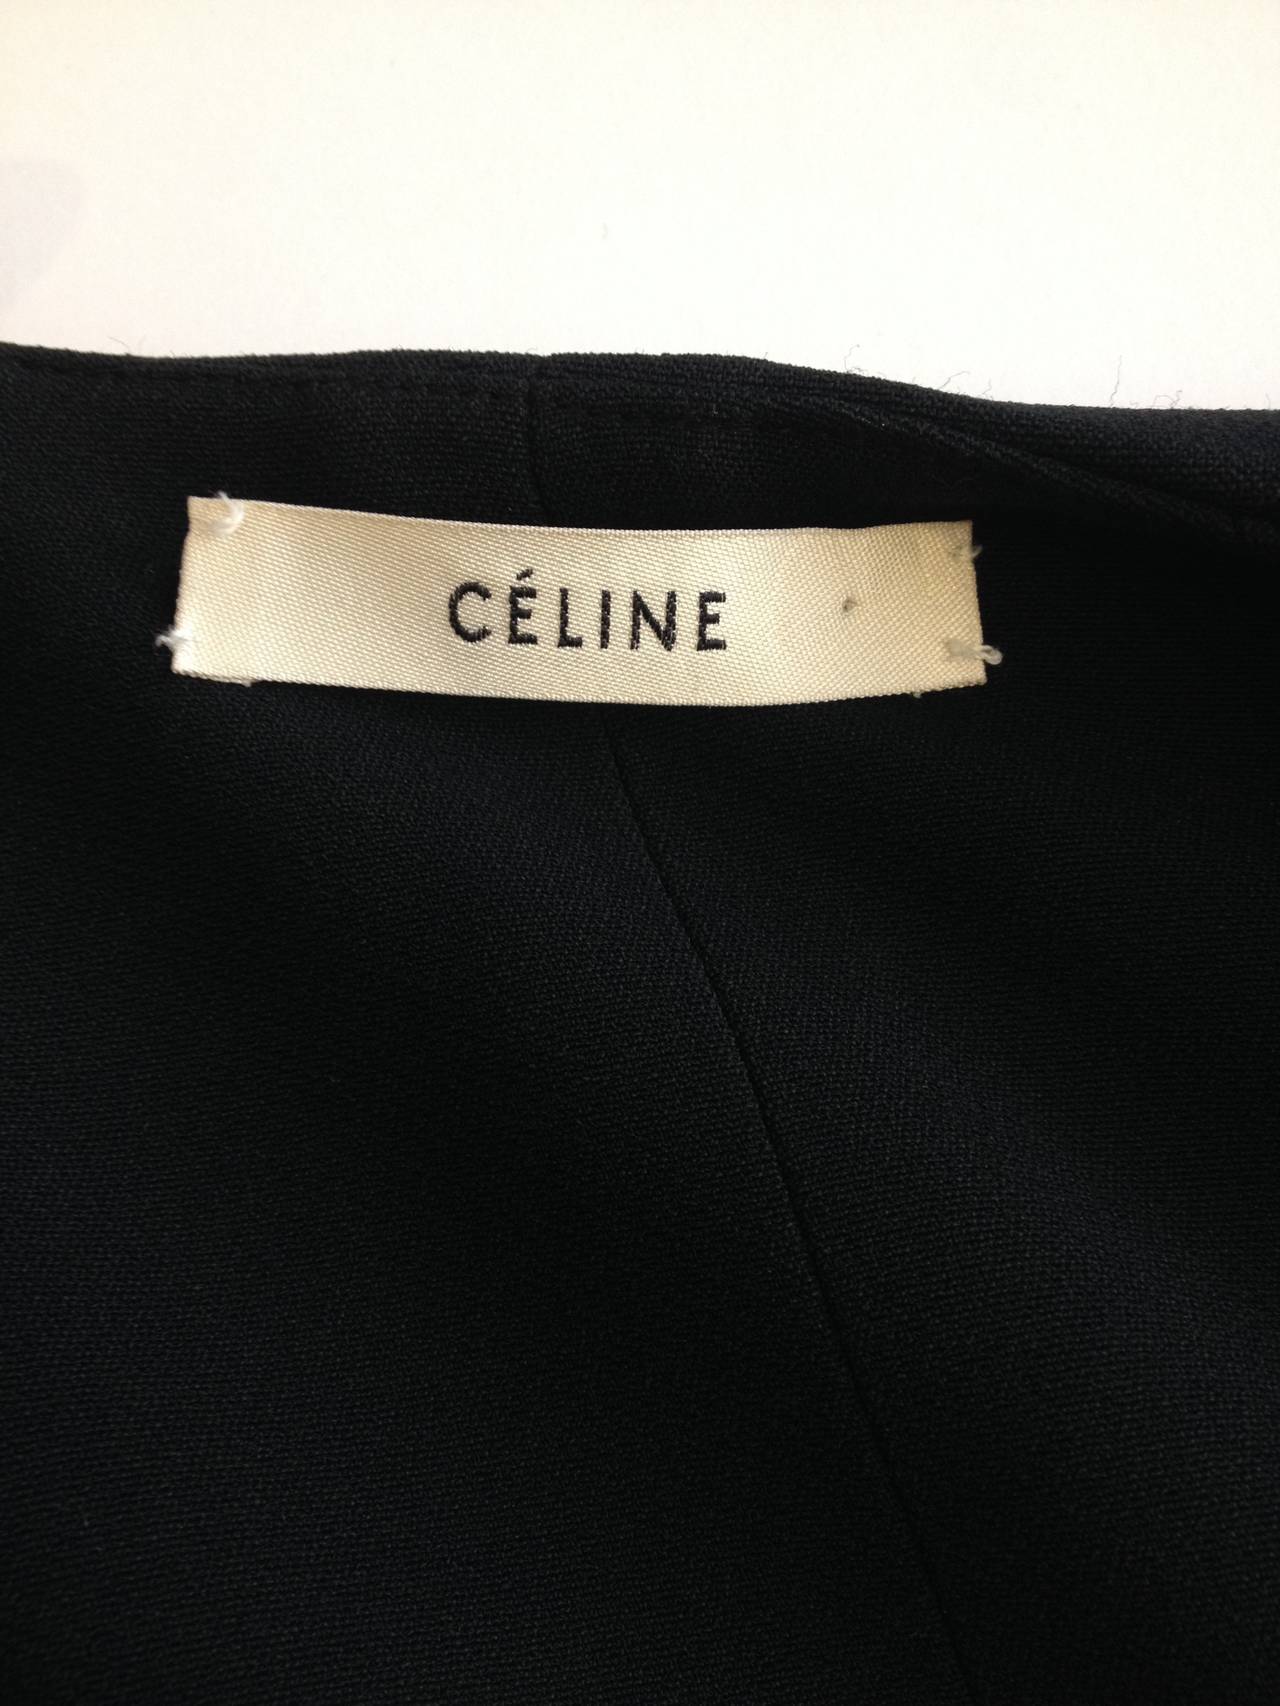 The precision and architecture of Celine pieces is always so striking. This vest is made of three straight and flat planes of fabric - the back and two front pieces, one of which folds over the other and snaps into place. The straight arm holes read